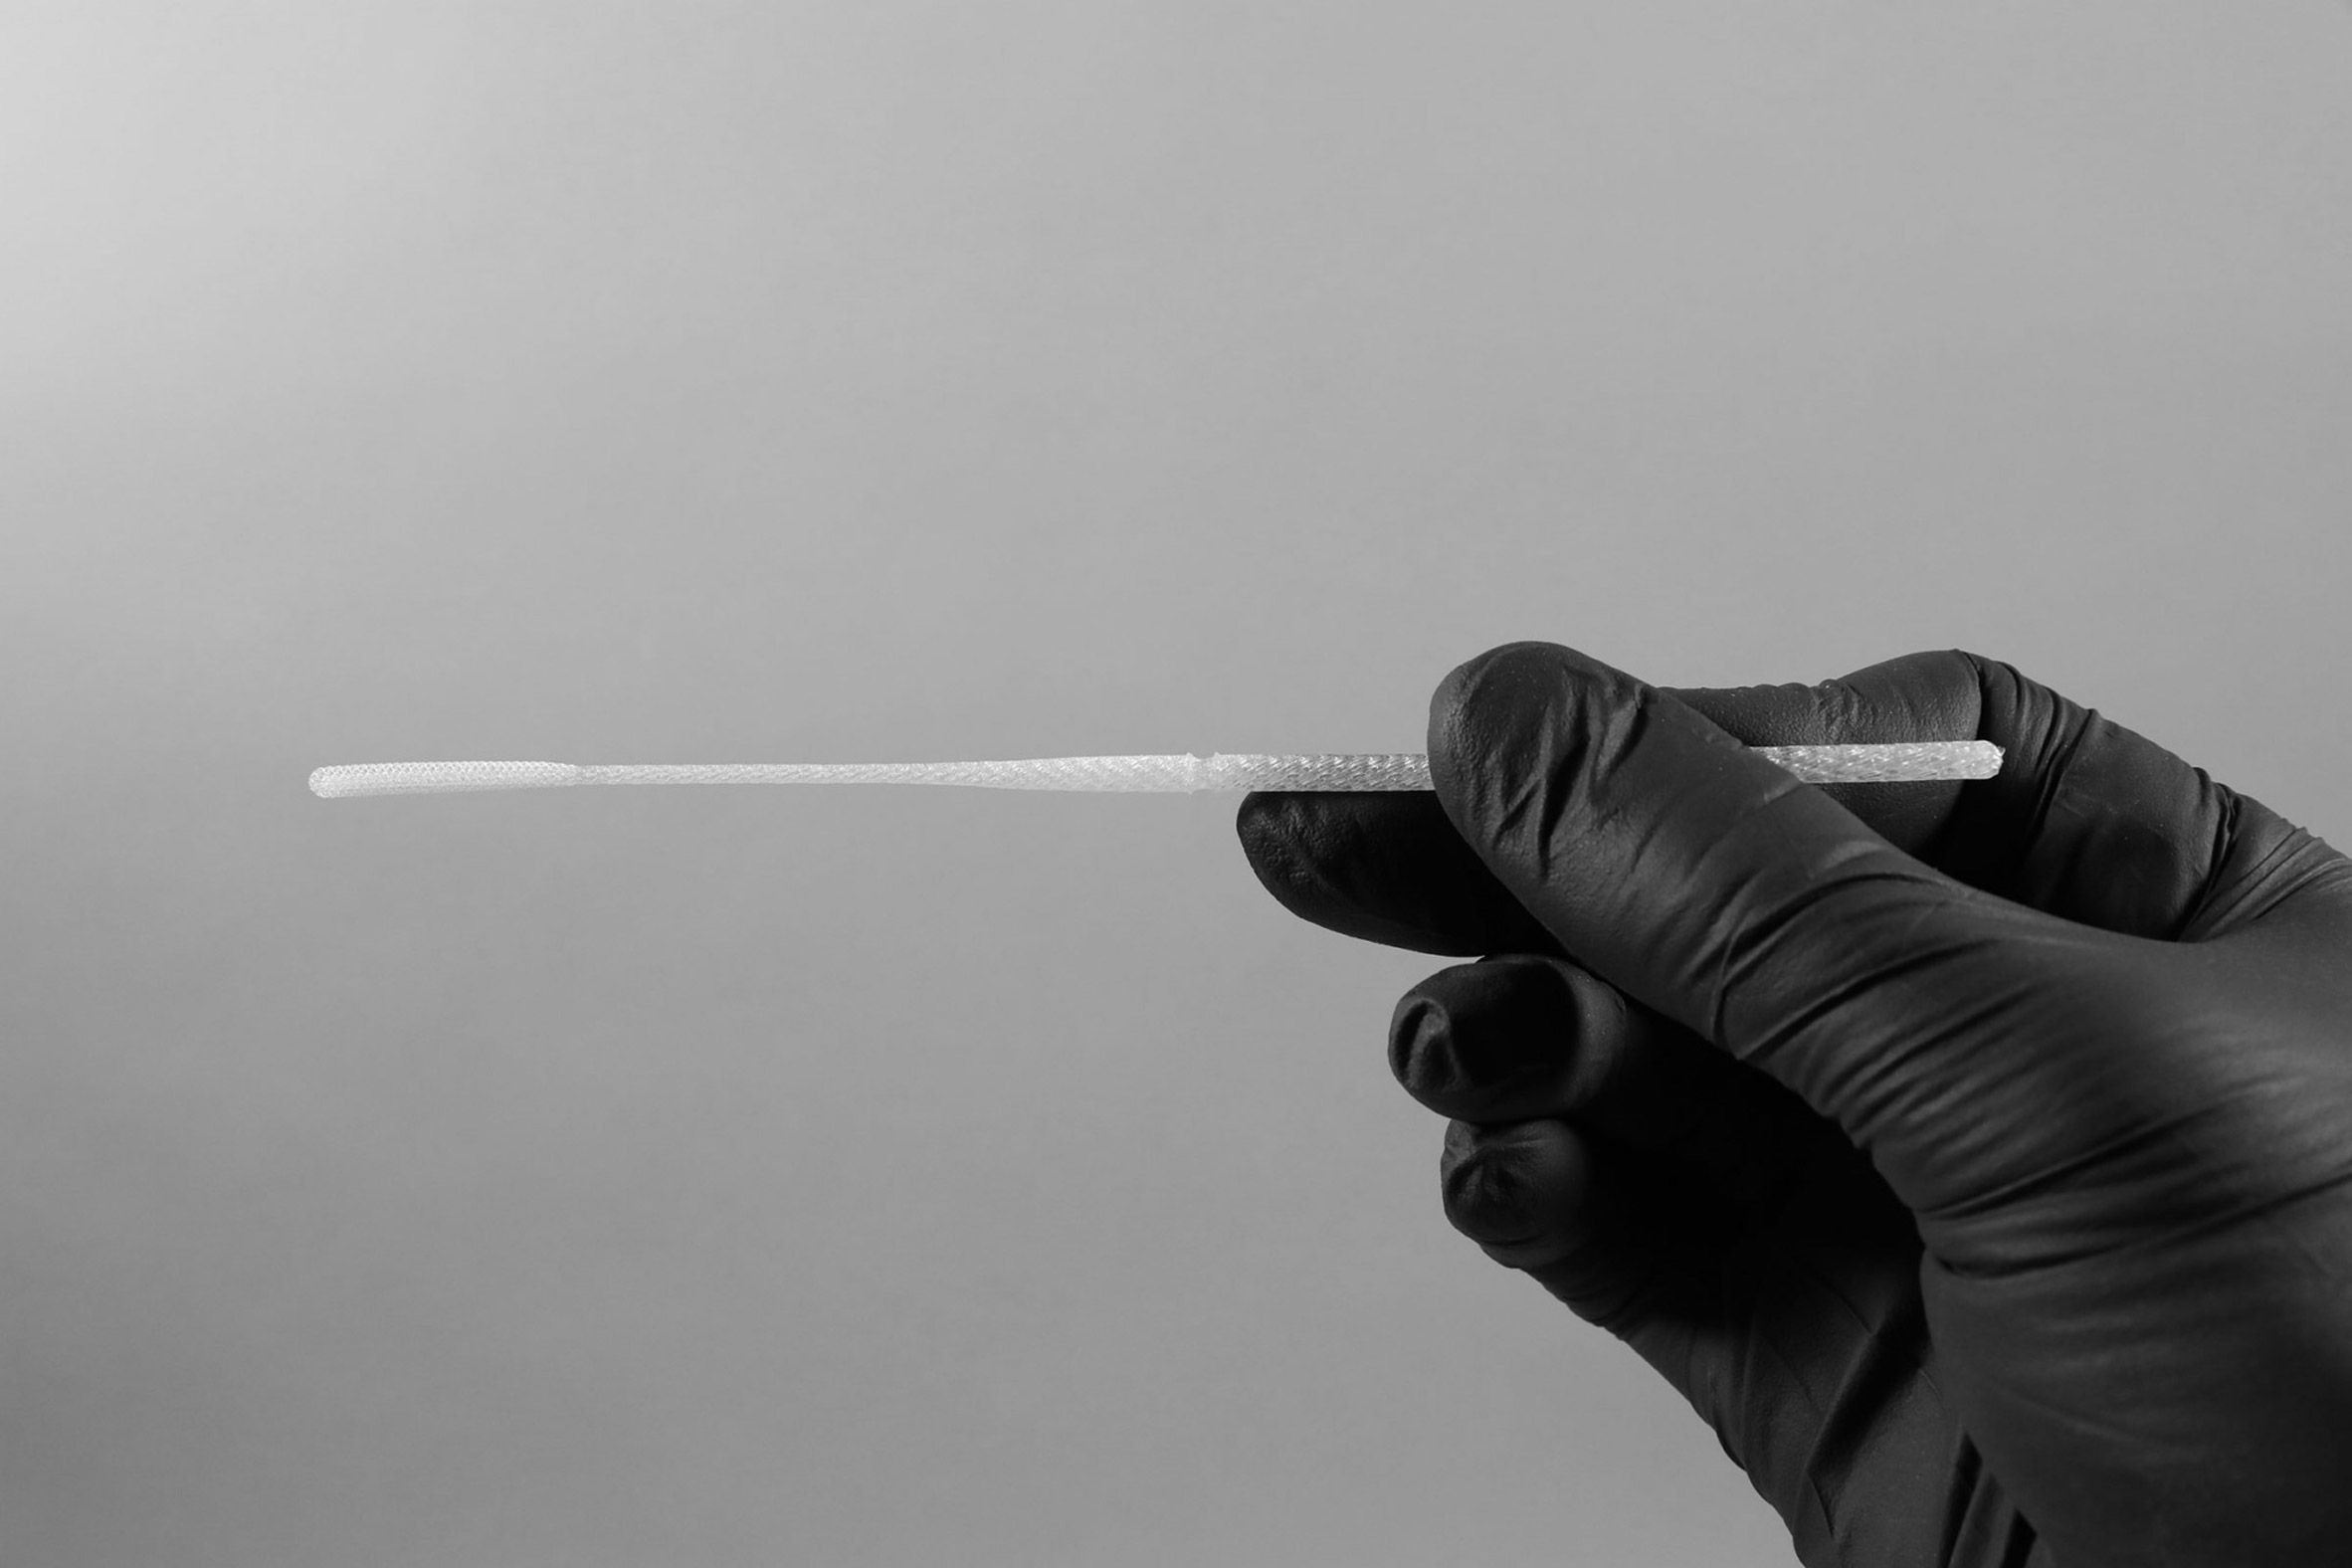 Gloved hand holding a swab for medical testing